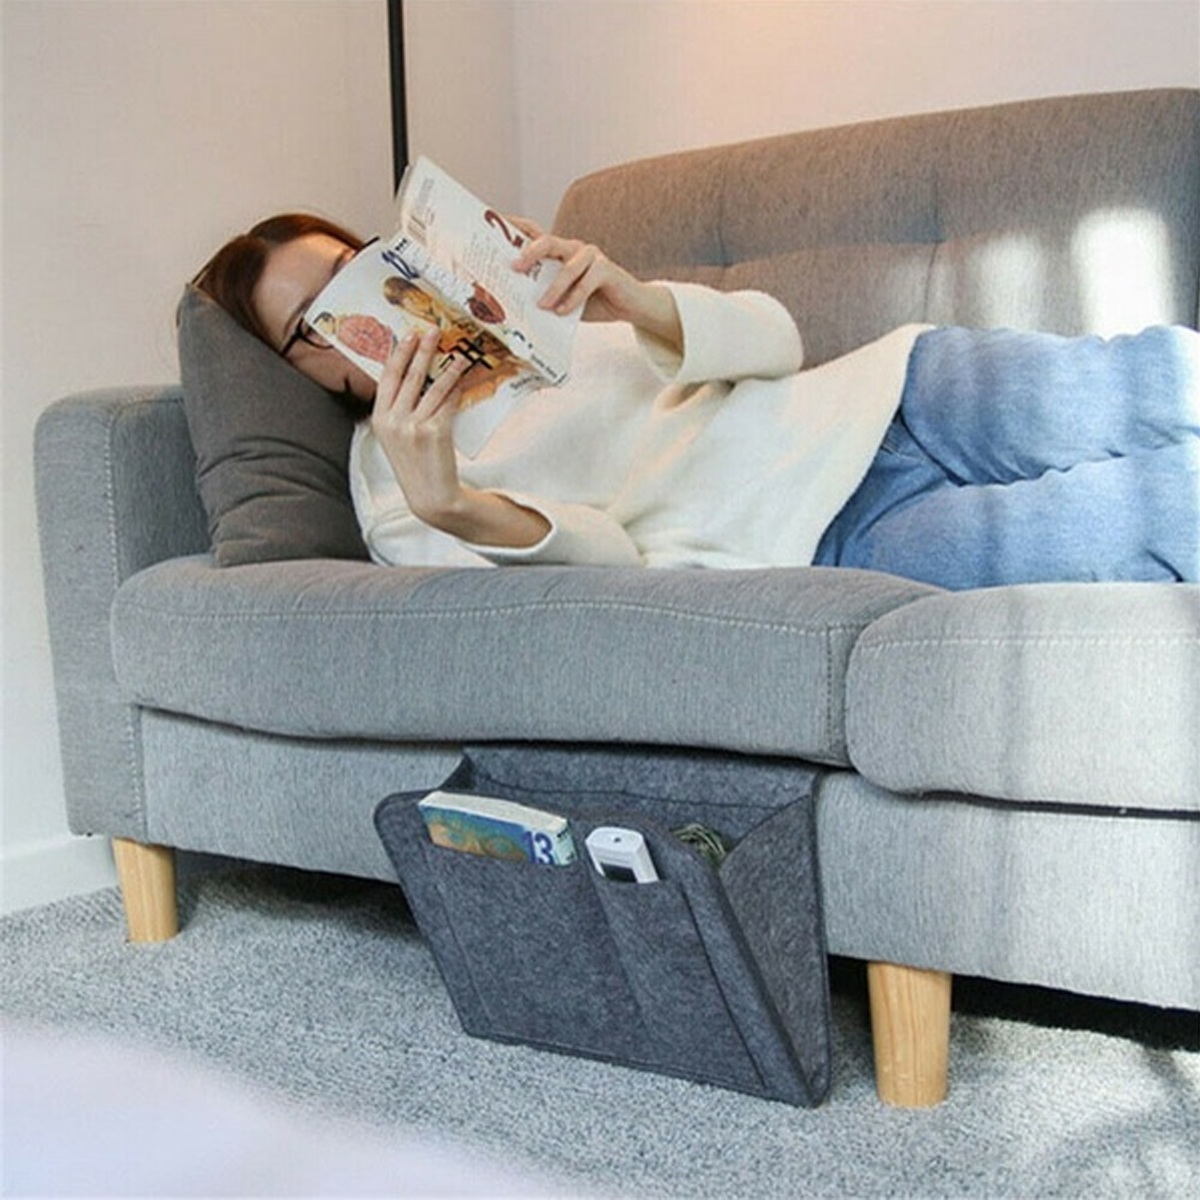 Bedside Caddy, Remote Control Holder Insert Mattress for Glasses, Laptop, Magazine, Gadgets, Cables Storage Organizer 12.6*7.9*3.9inch Phone Hanging Parts Storage Bag